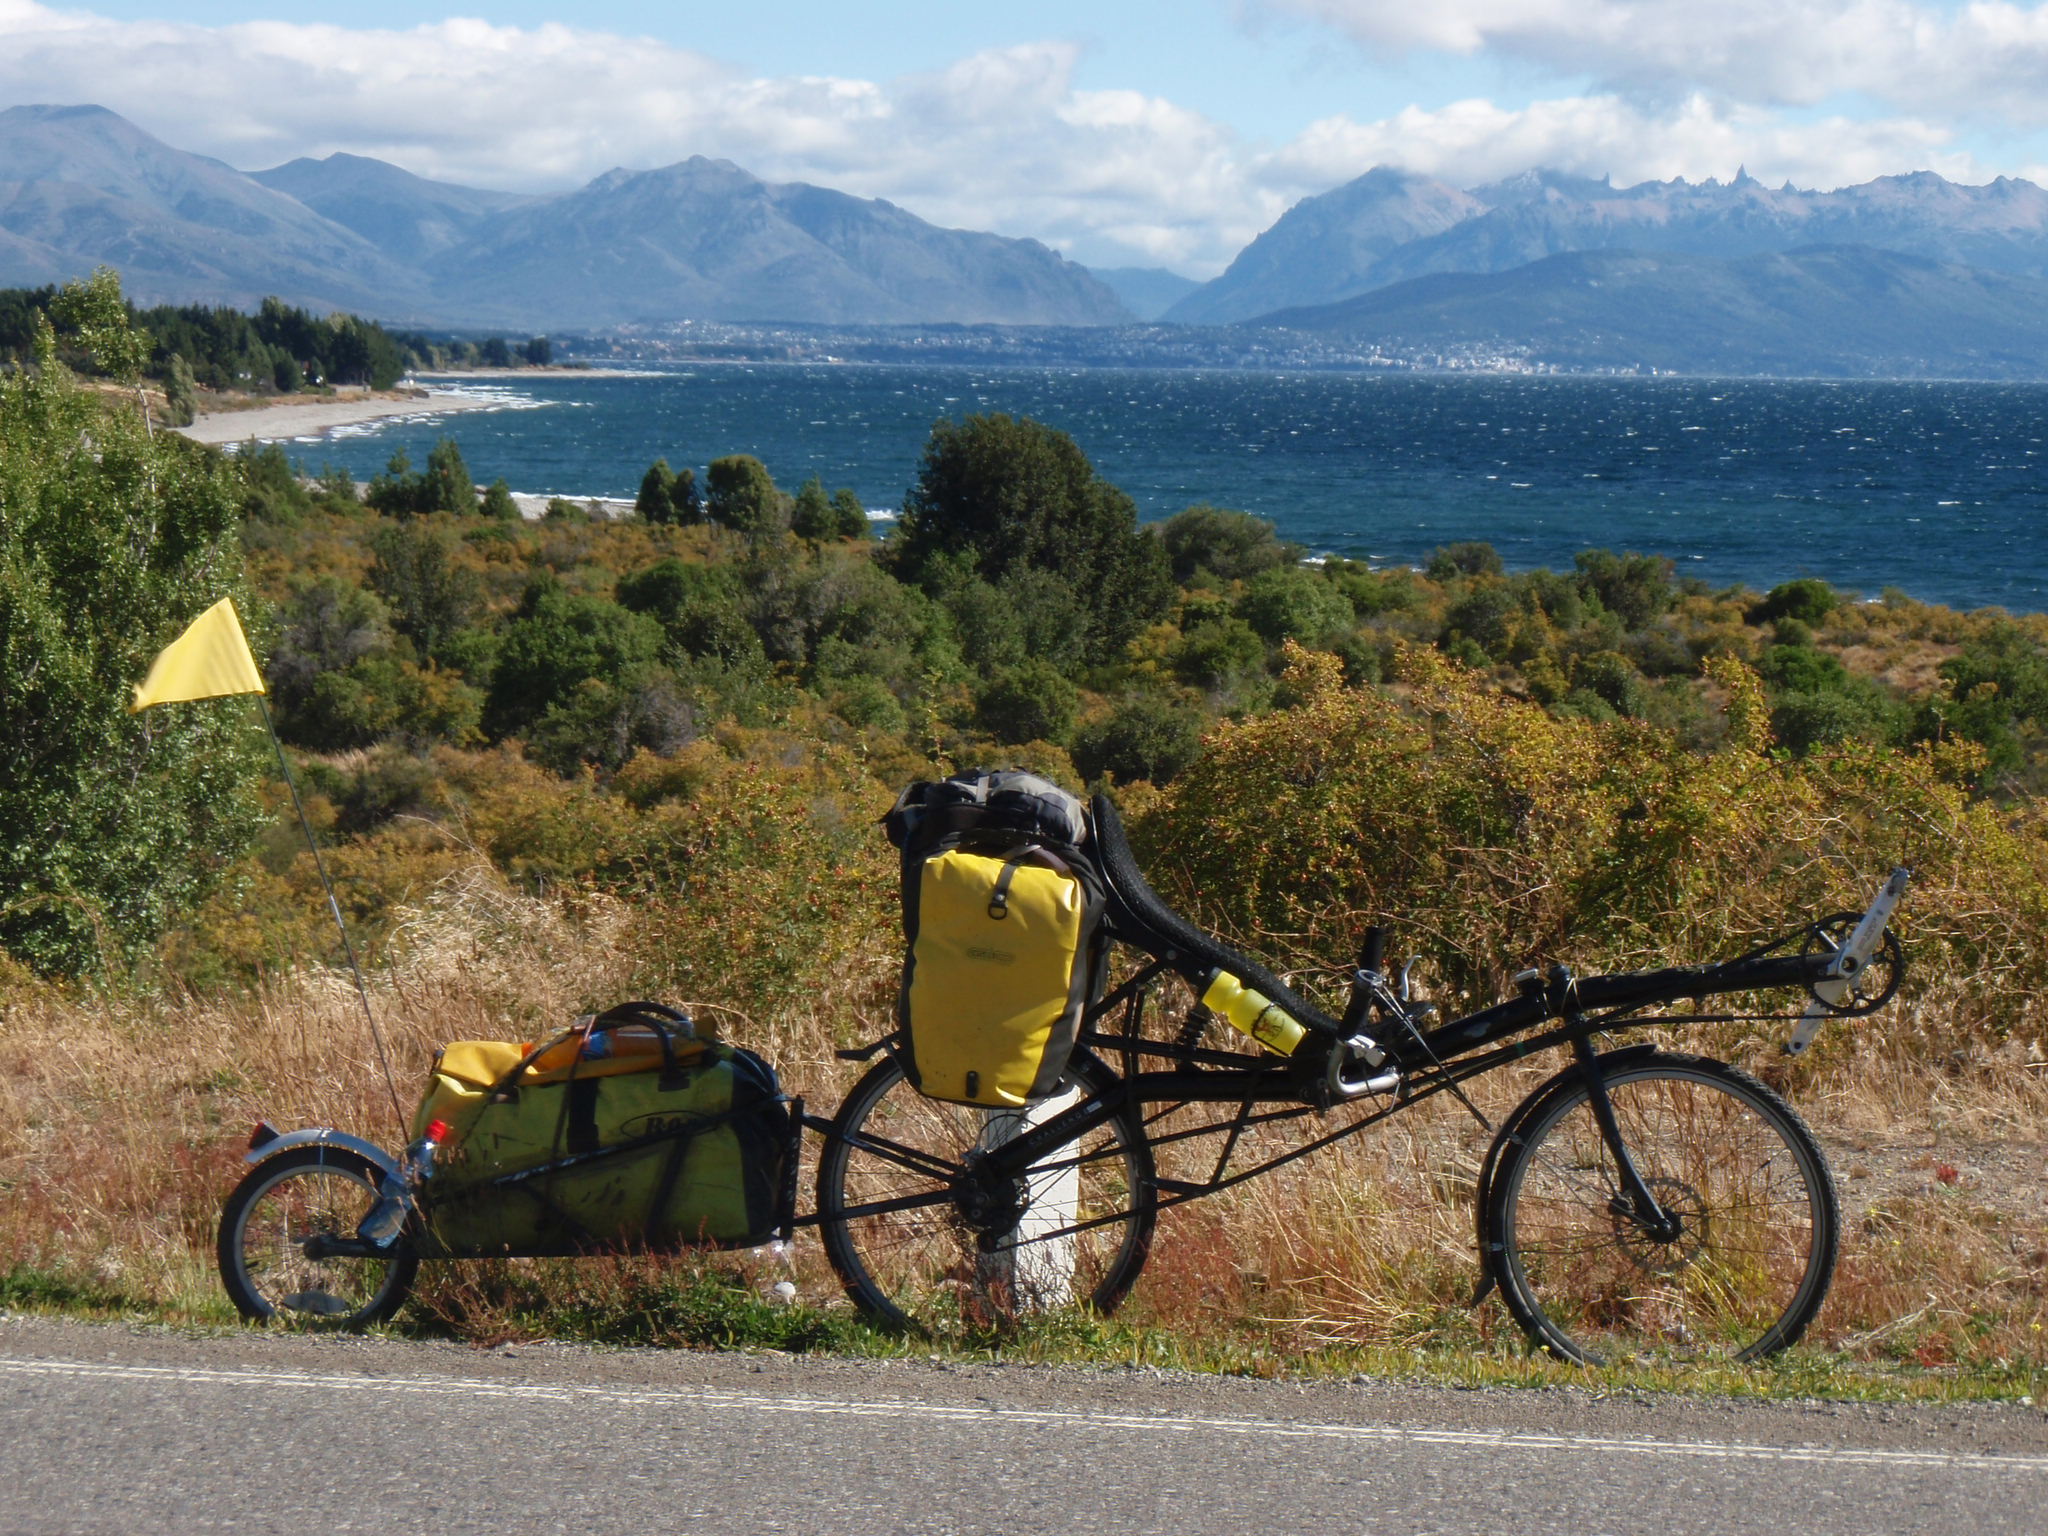 Leaving Bariloche (in background) and riding along Lago Nahuel Huapi